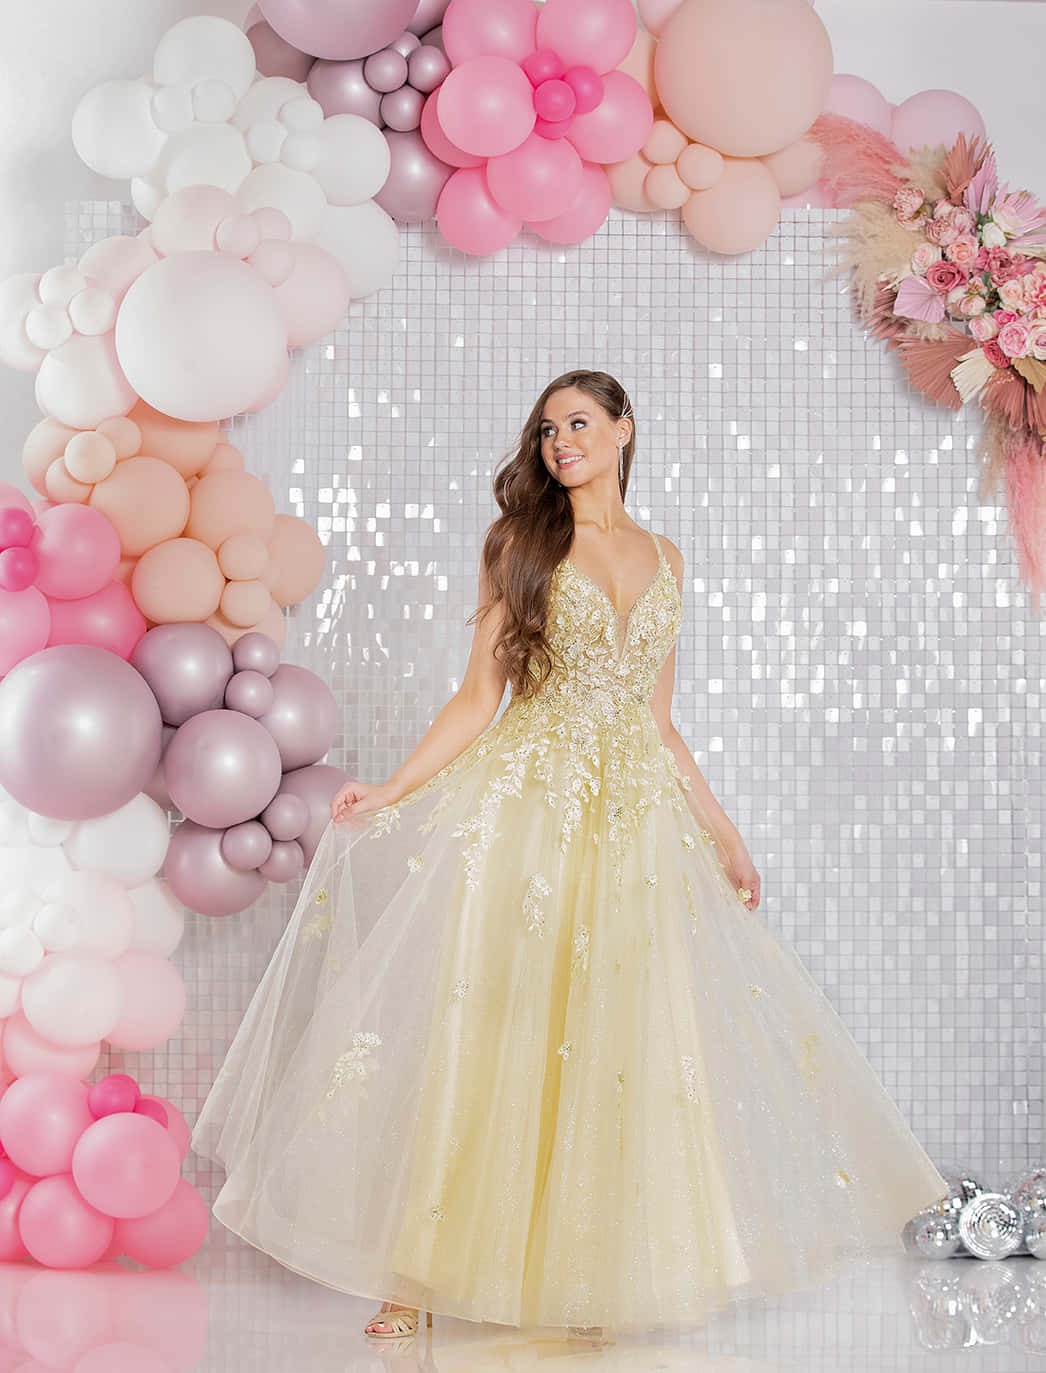 Celebrate your Quinceanera with family and friends